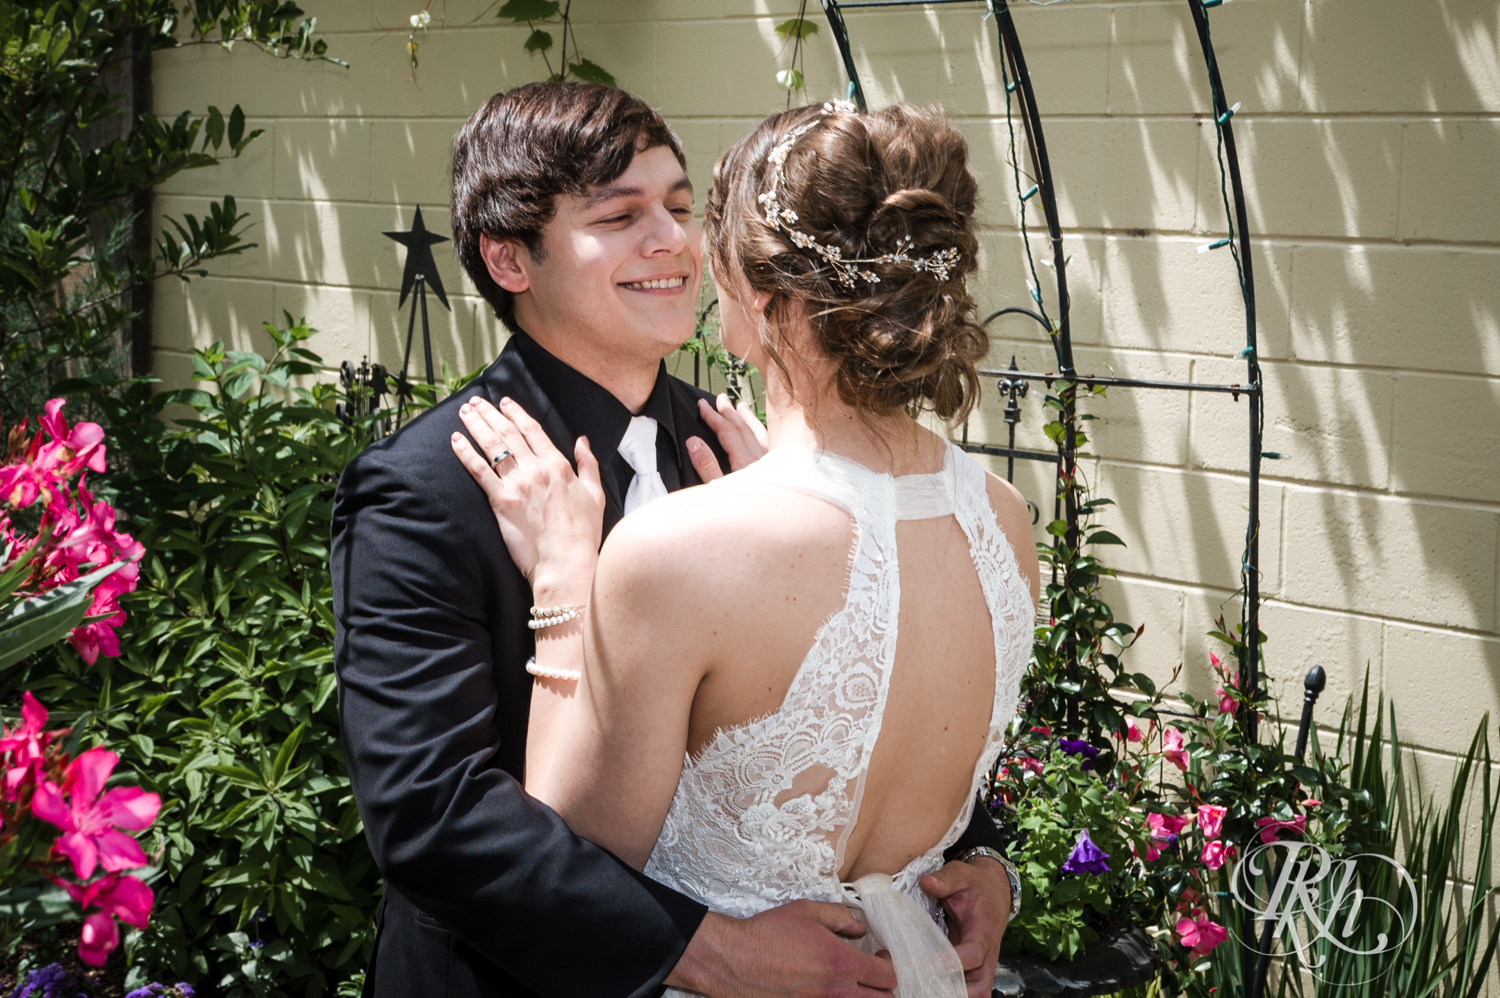 Bride and groom share first look during summer at Kellerman's Event Center in White Bear Lake, Minnesota.